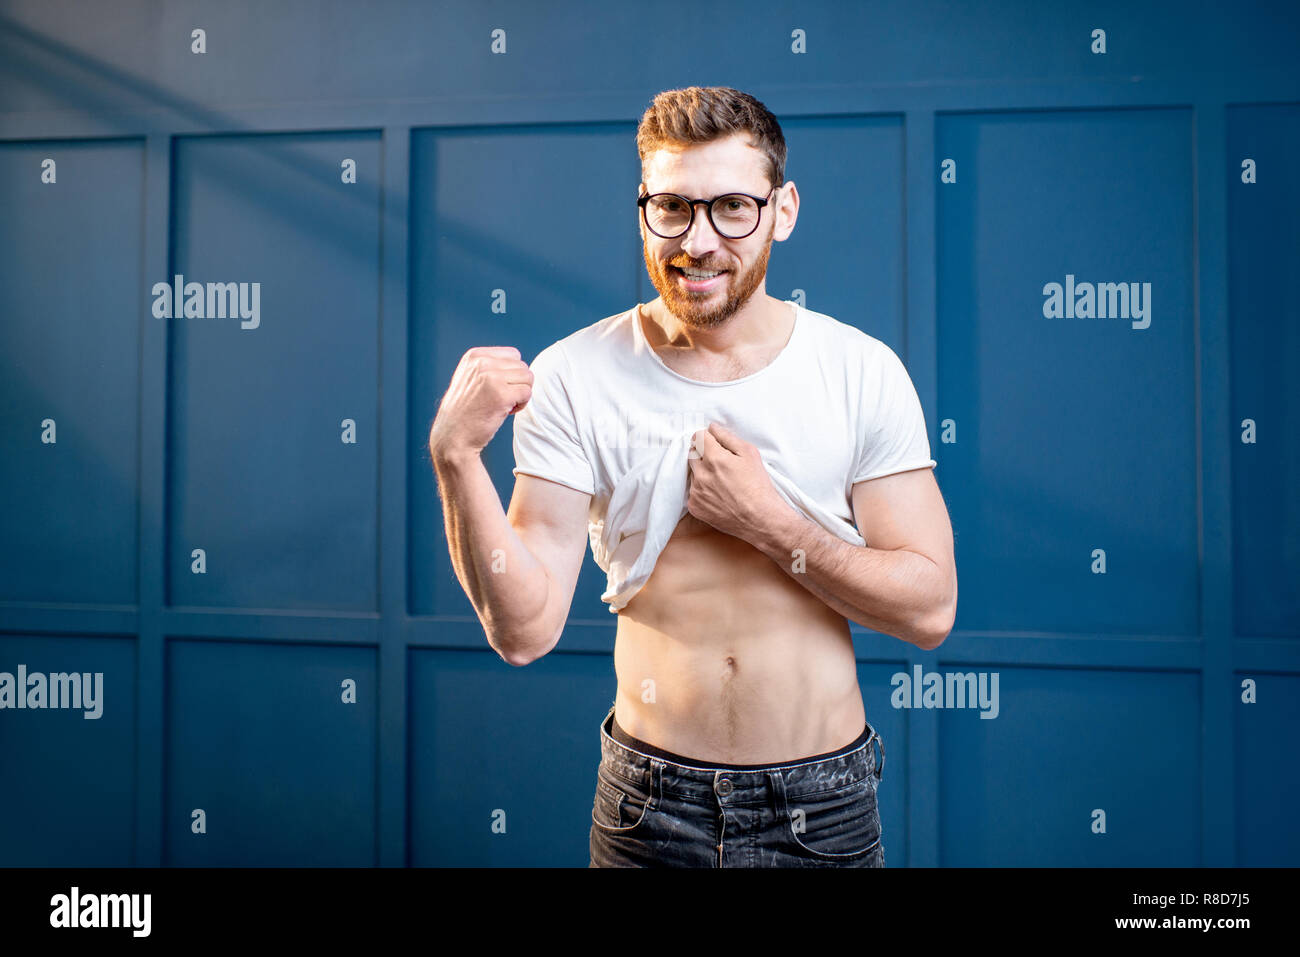 Portrait of a handsome strong man showing biceps and abdominal muscles on the blue wall background Stock Photo